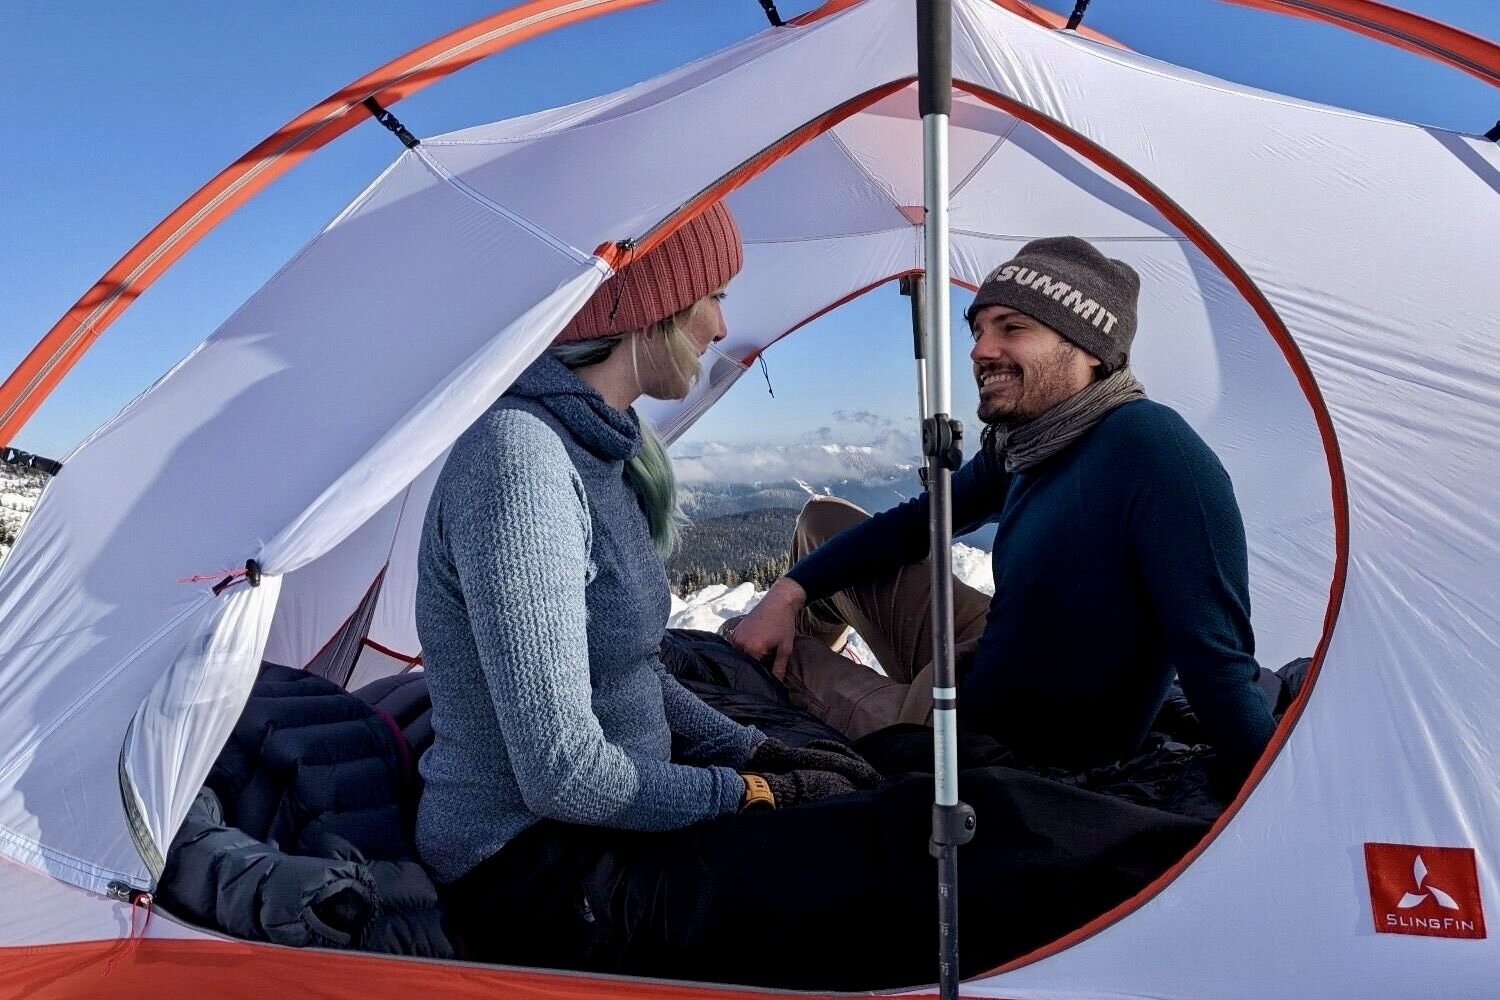 Two hikers sitting in the Slingfin Crossbow tent. The woman is wearing the Patagonia Capilene Air Hoodie